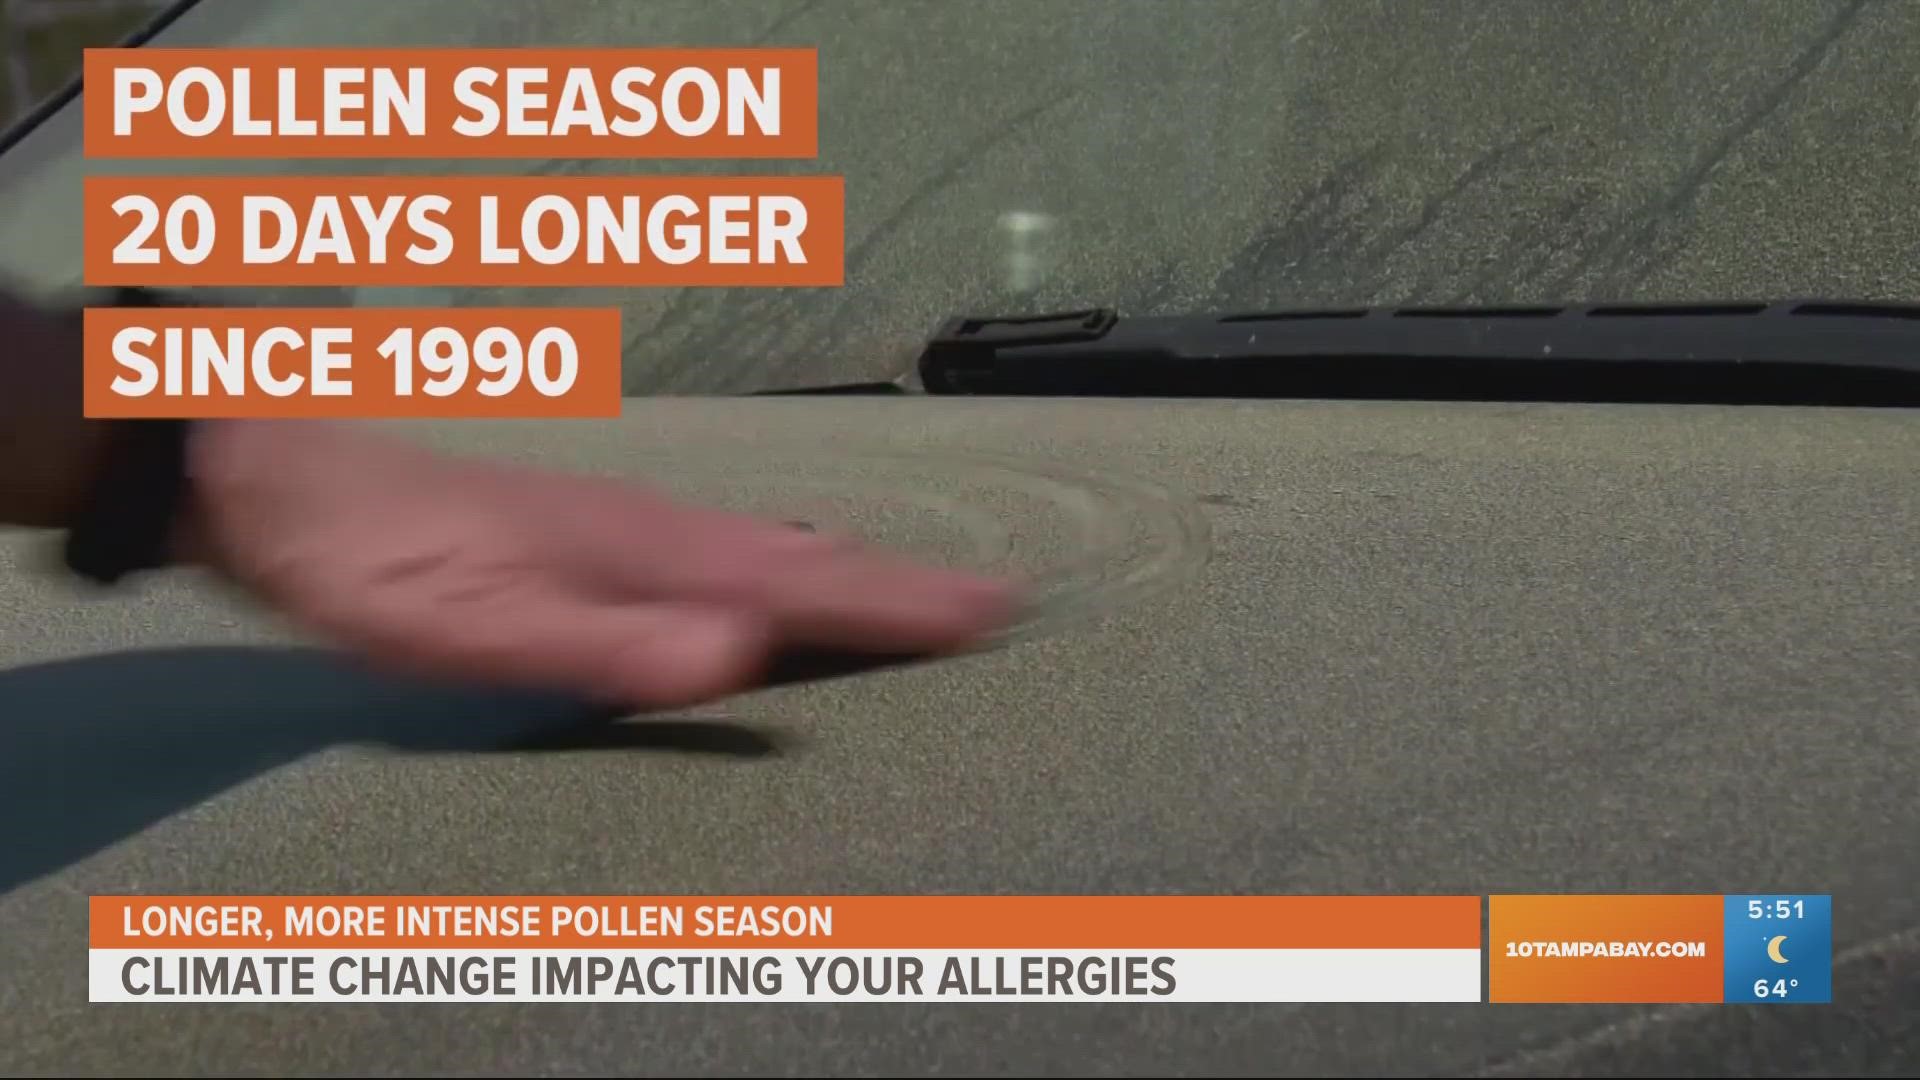 Pollen season is getting longer and more intense